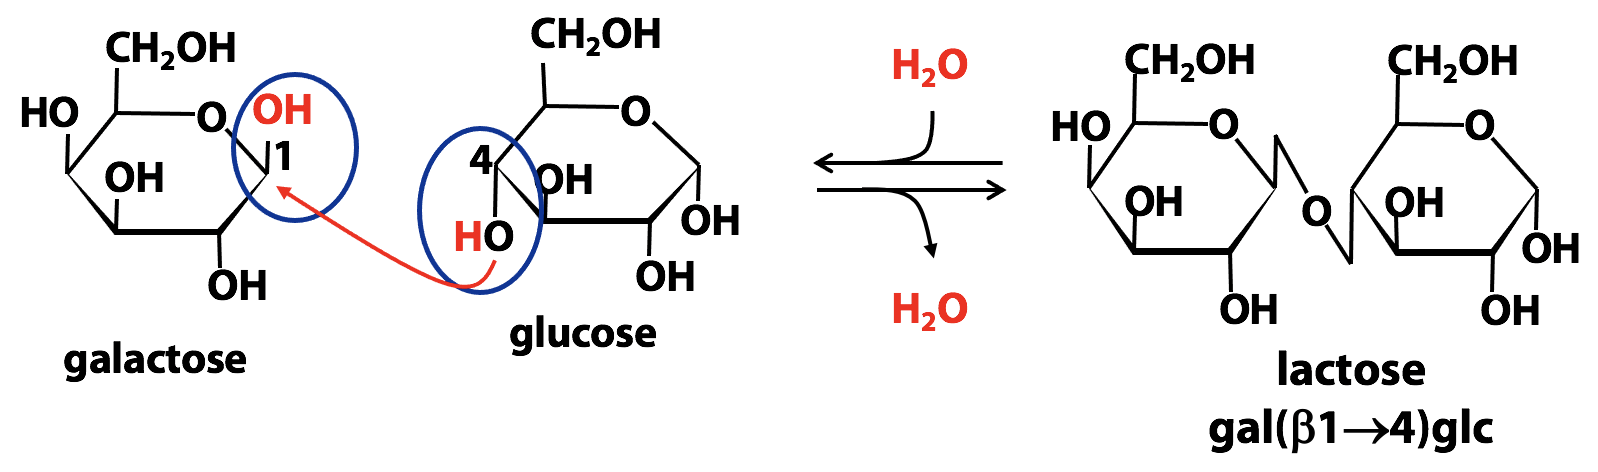 SOLVED: OH OH OH CHOH OH The Haworth diagram of tagatose shown above is  best said to represent the monosaccharide's anomer. Select one a. alpha- furanose b. beta-furanose c. beta-pyranose d. alpha-pyranose